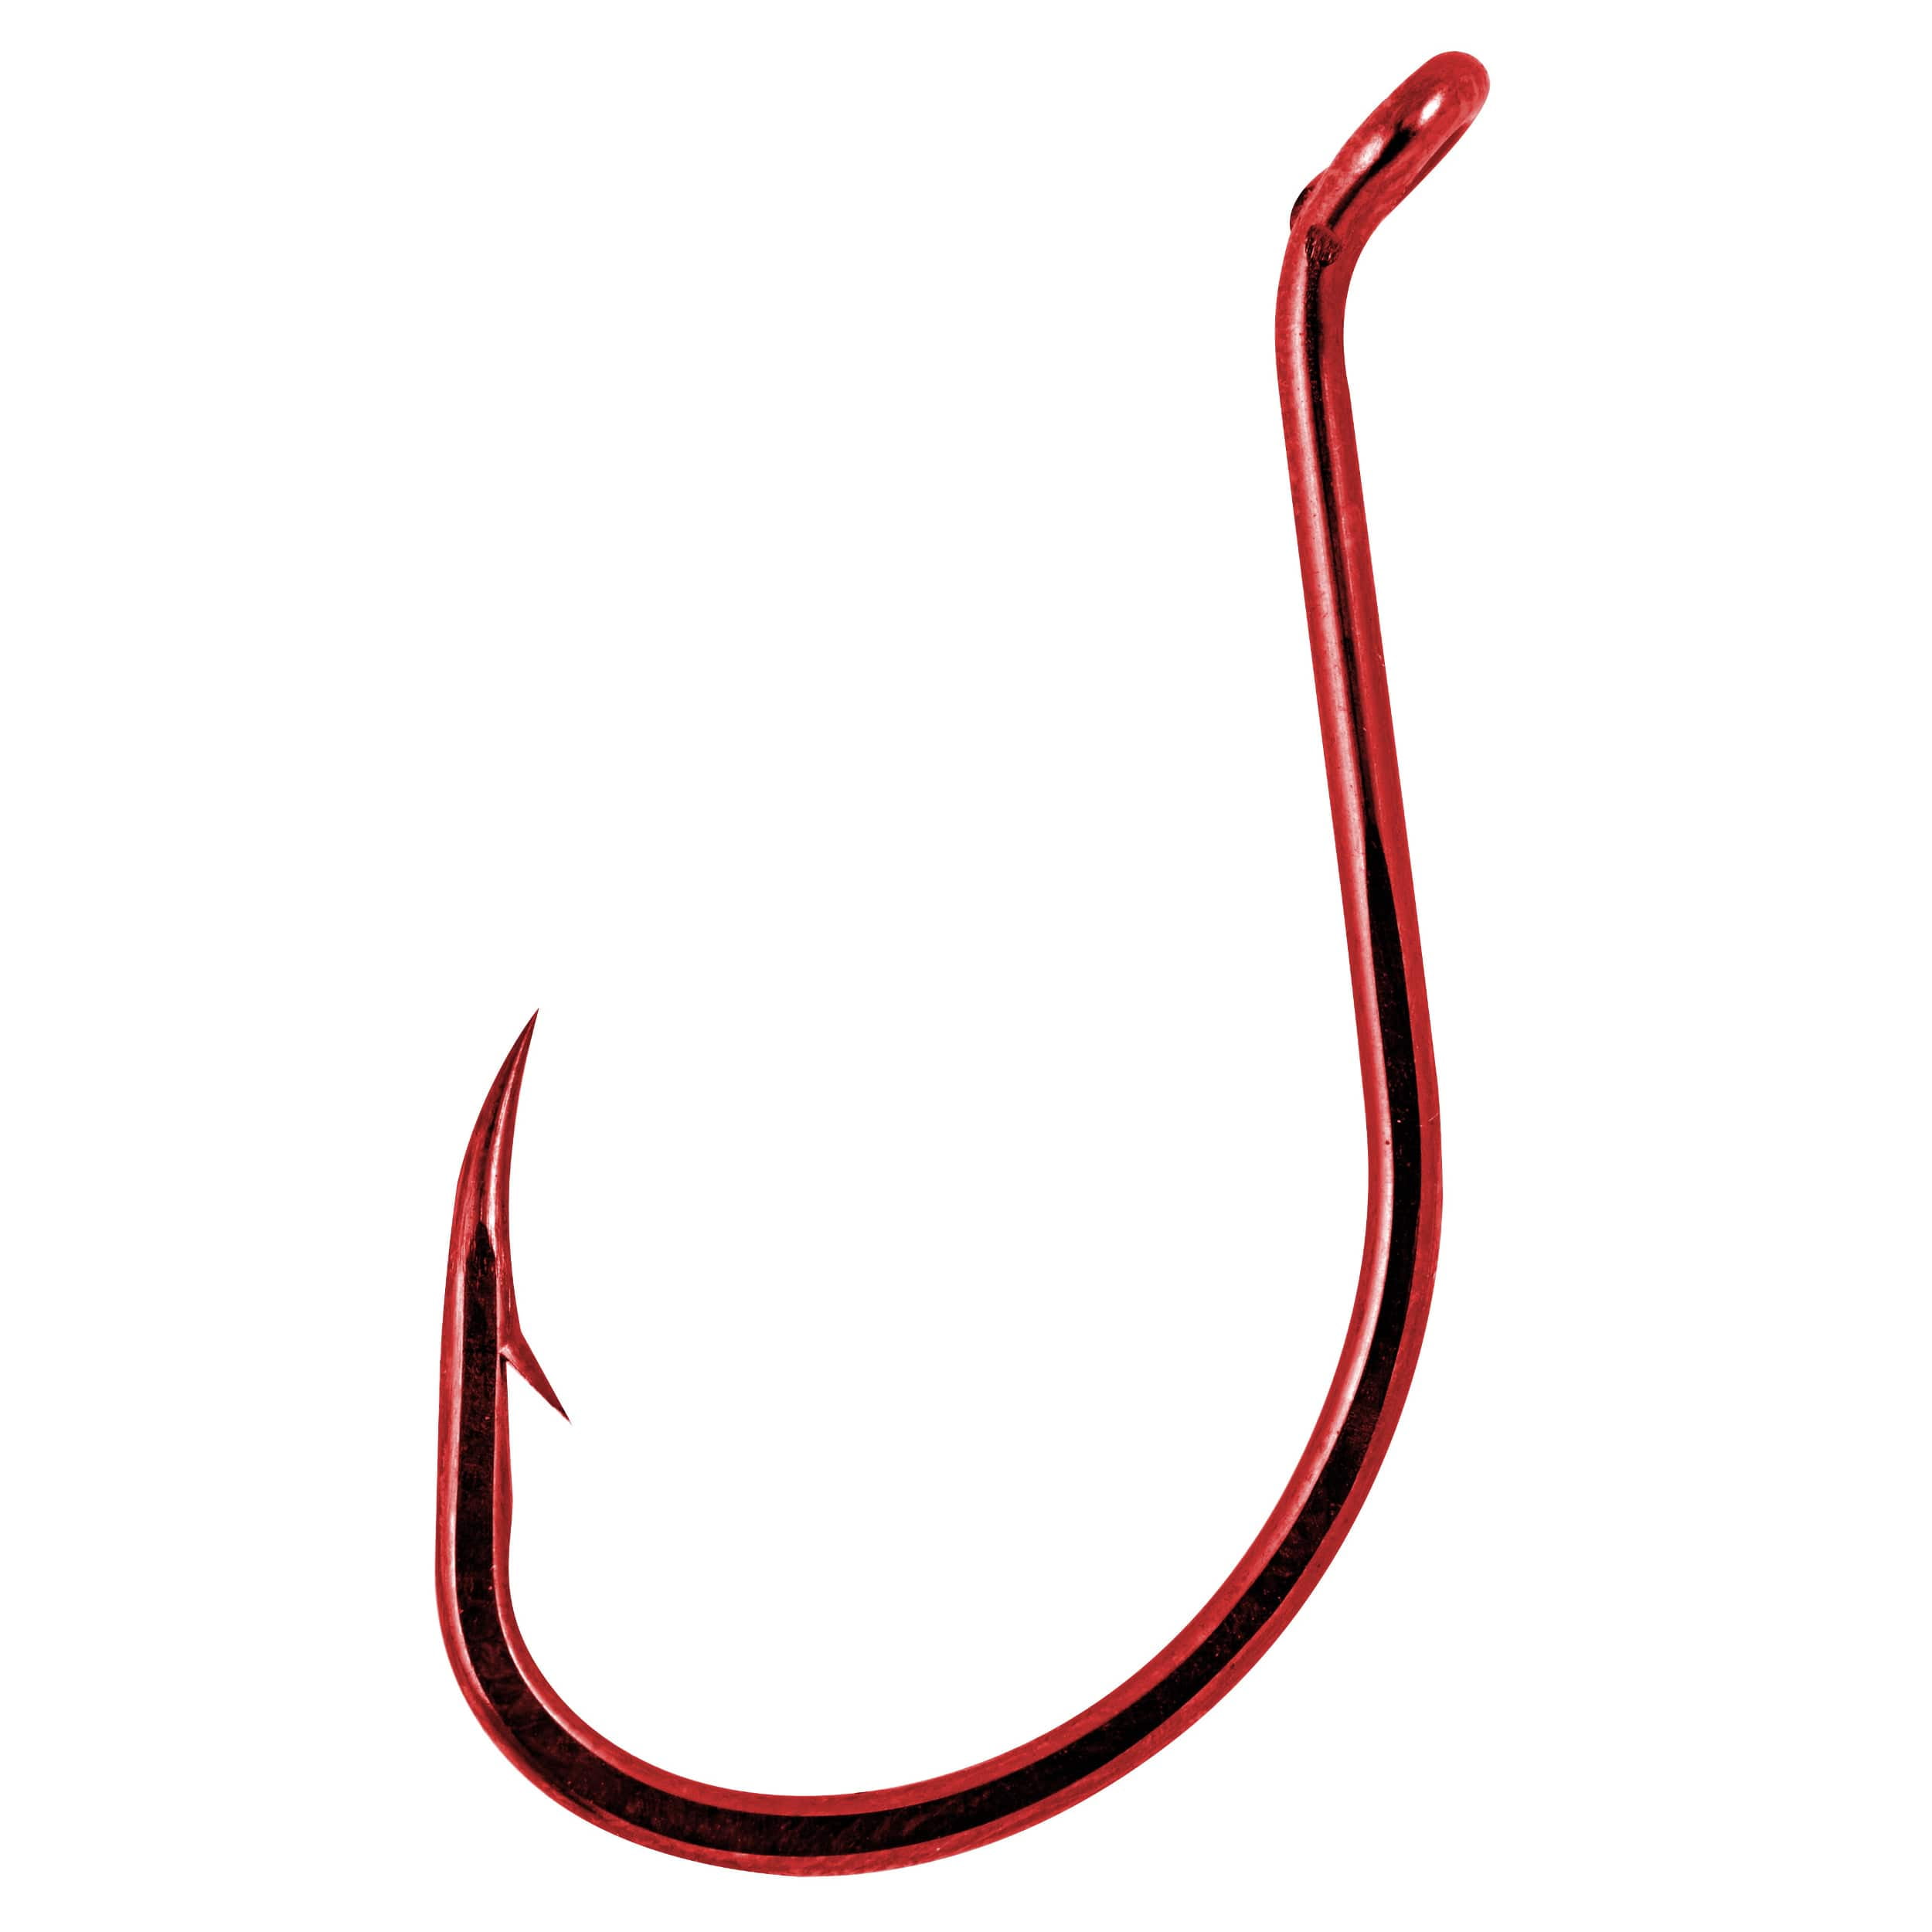 Gamakatsu Octopus Hooks Value Pack, Red, 3/0 - 25 count